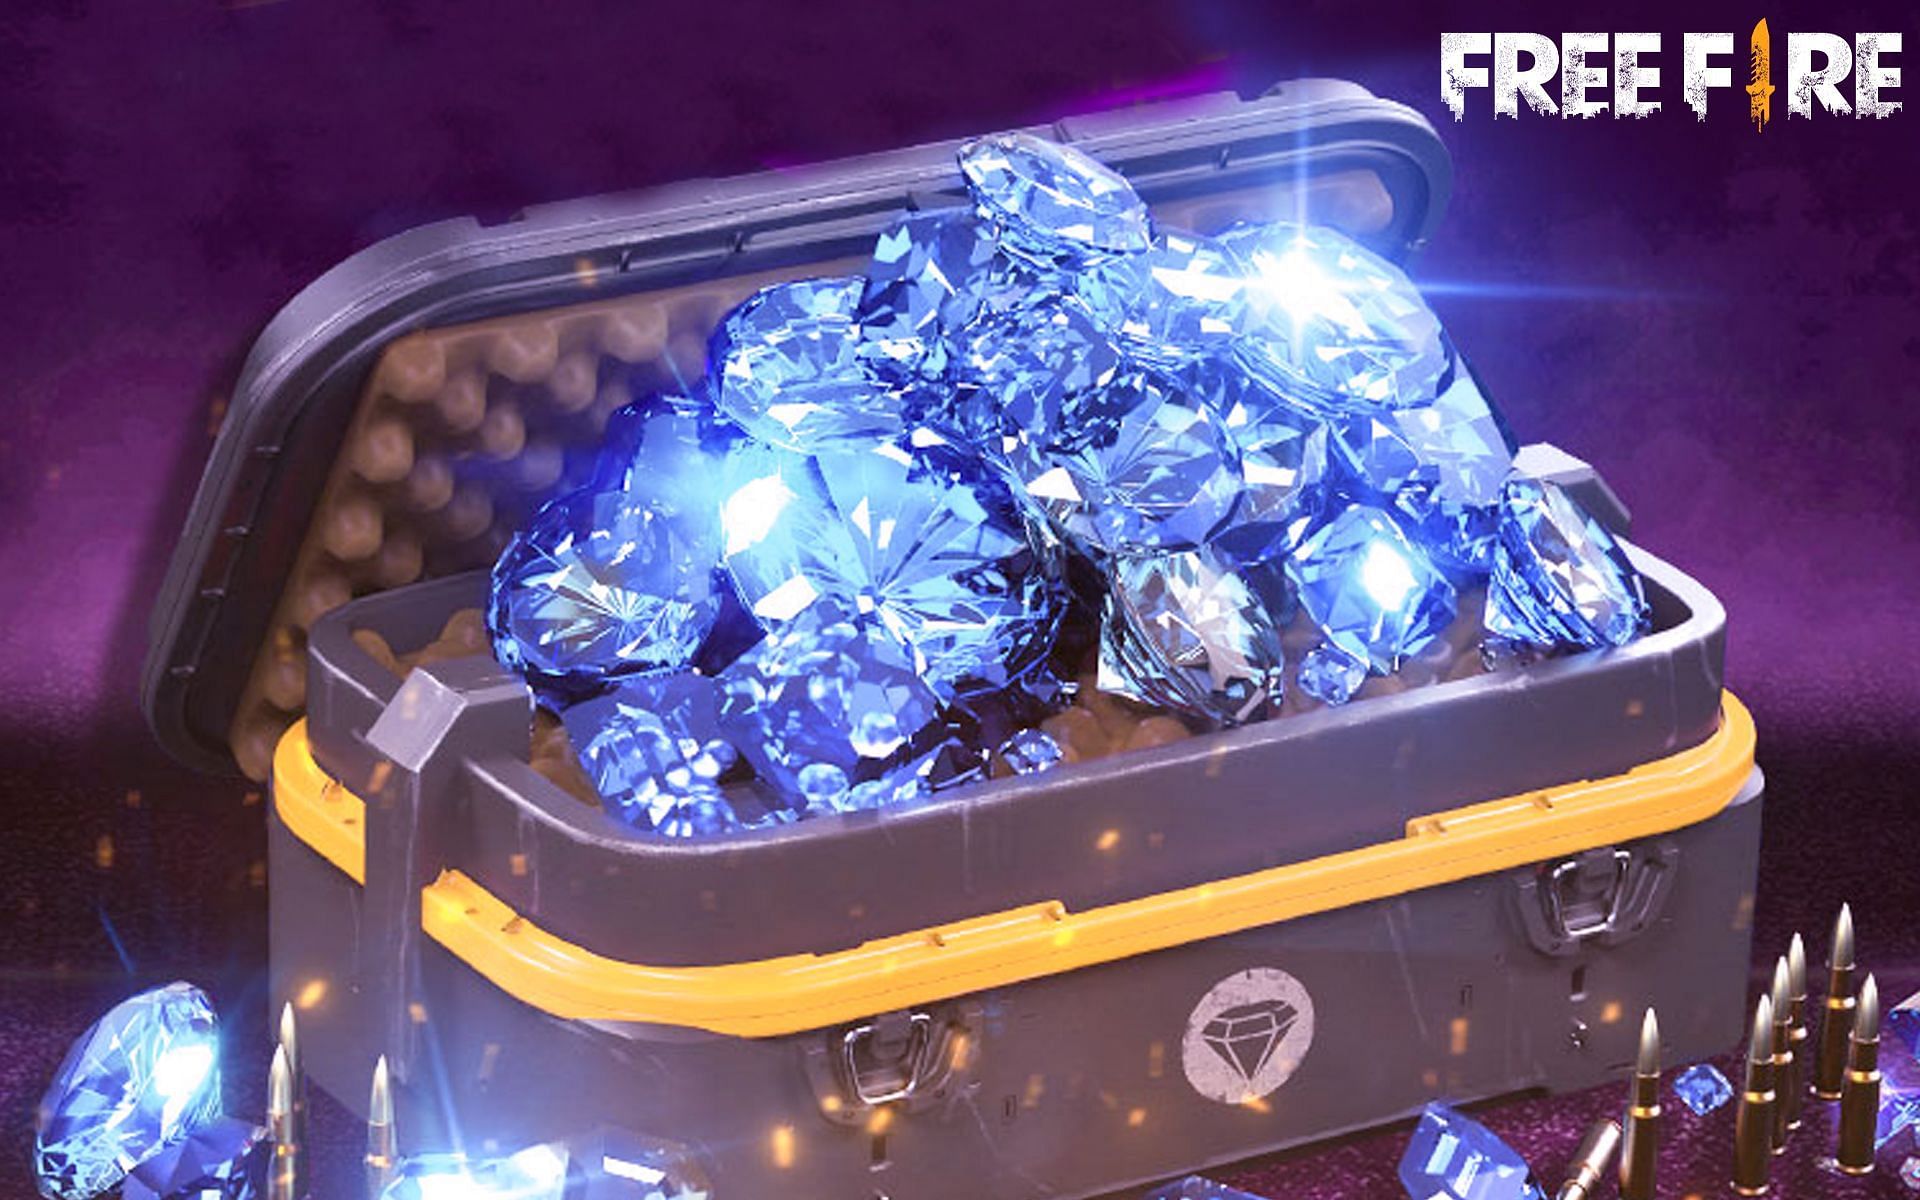 Diamonds can be used to get items for cheap through the Mystery Shop in Free Fire (Image via Sportskeeda)